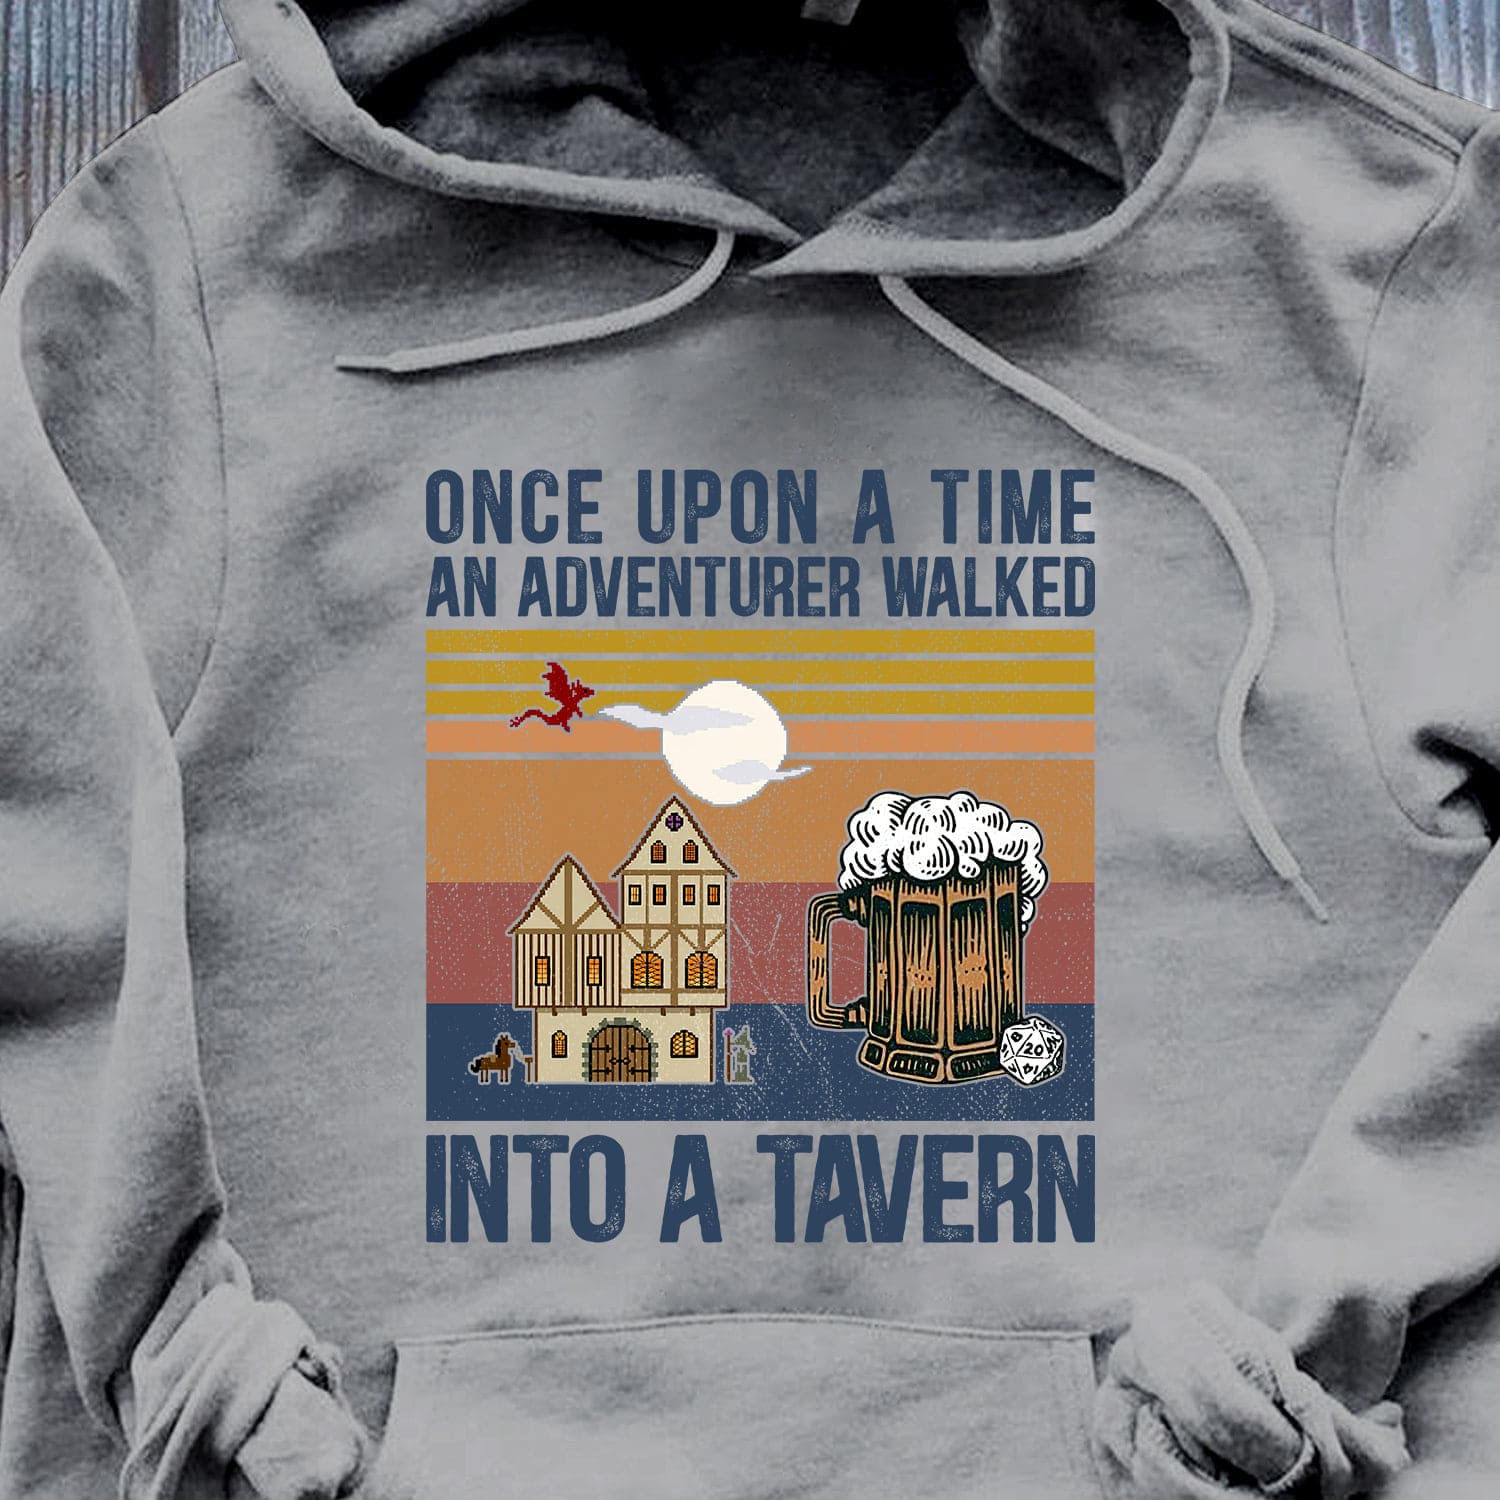 Once upon a time an adventurer walked into a tavern - Beer and dice, Dungeons and Dragons